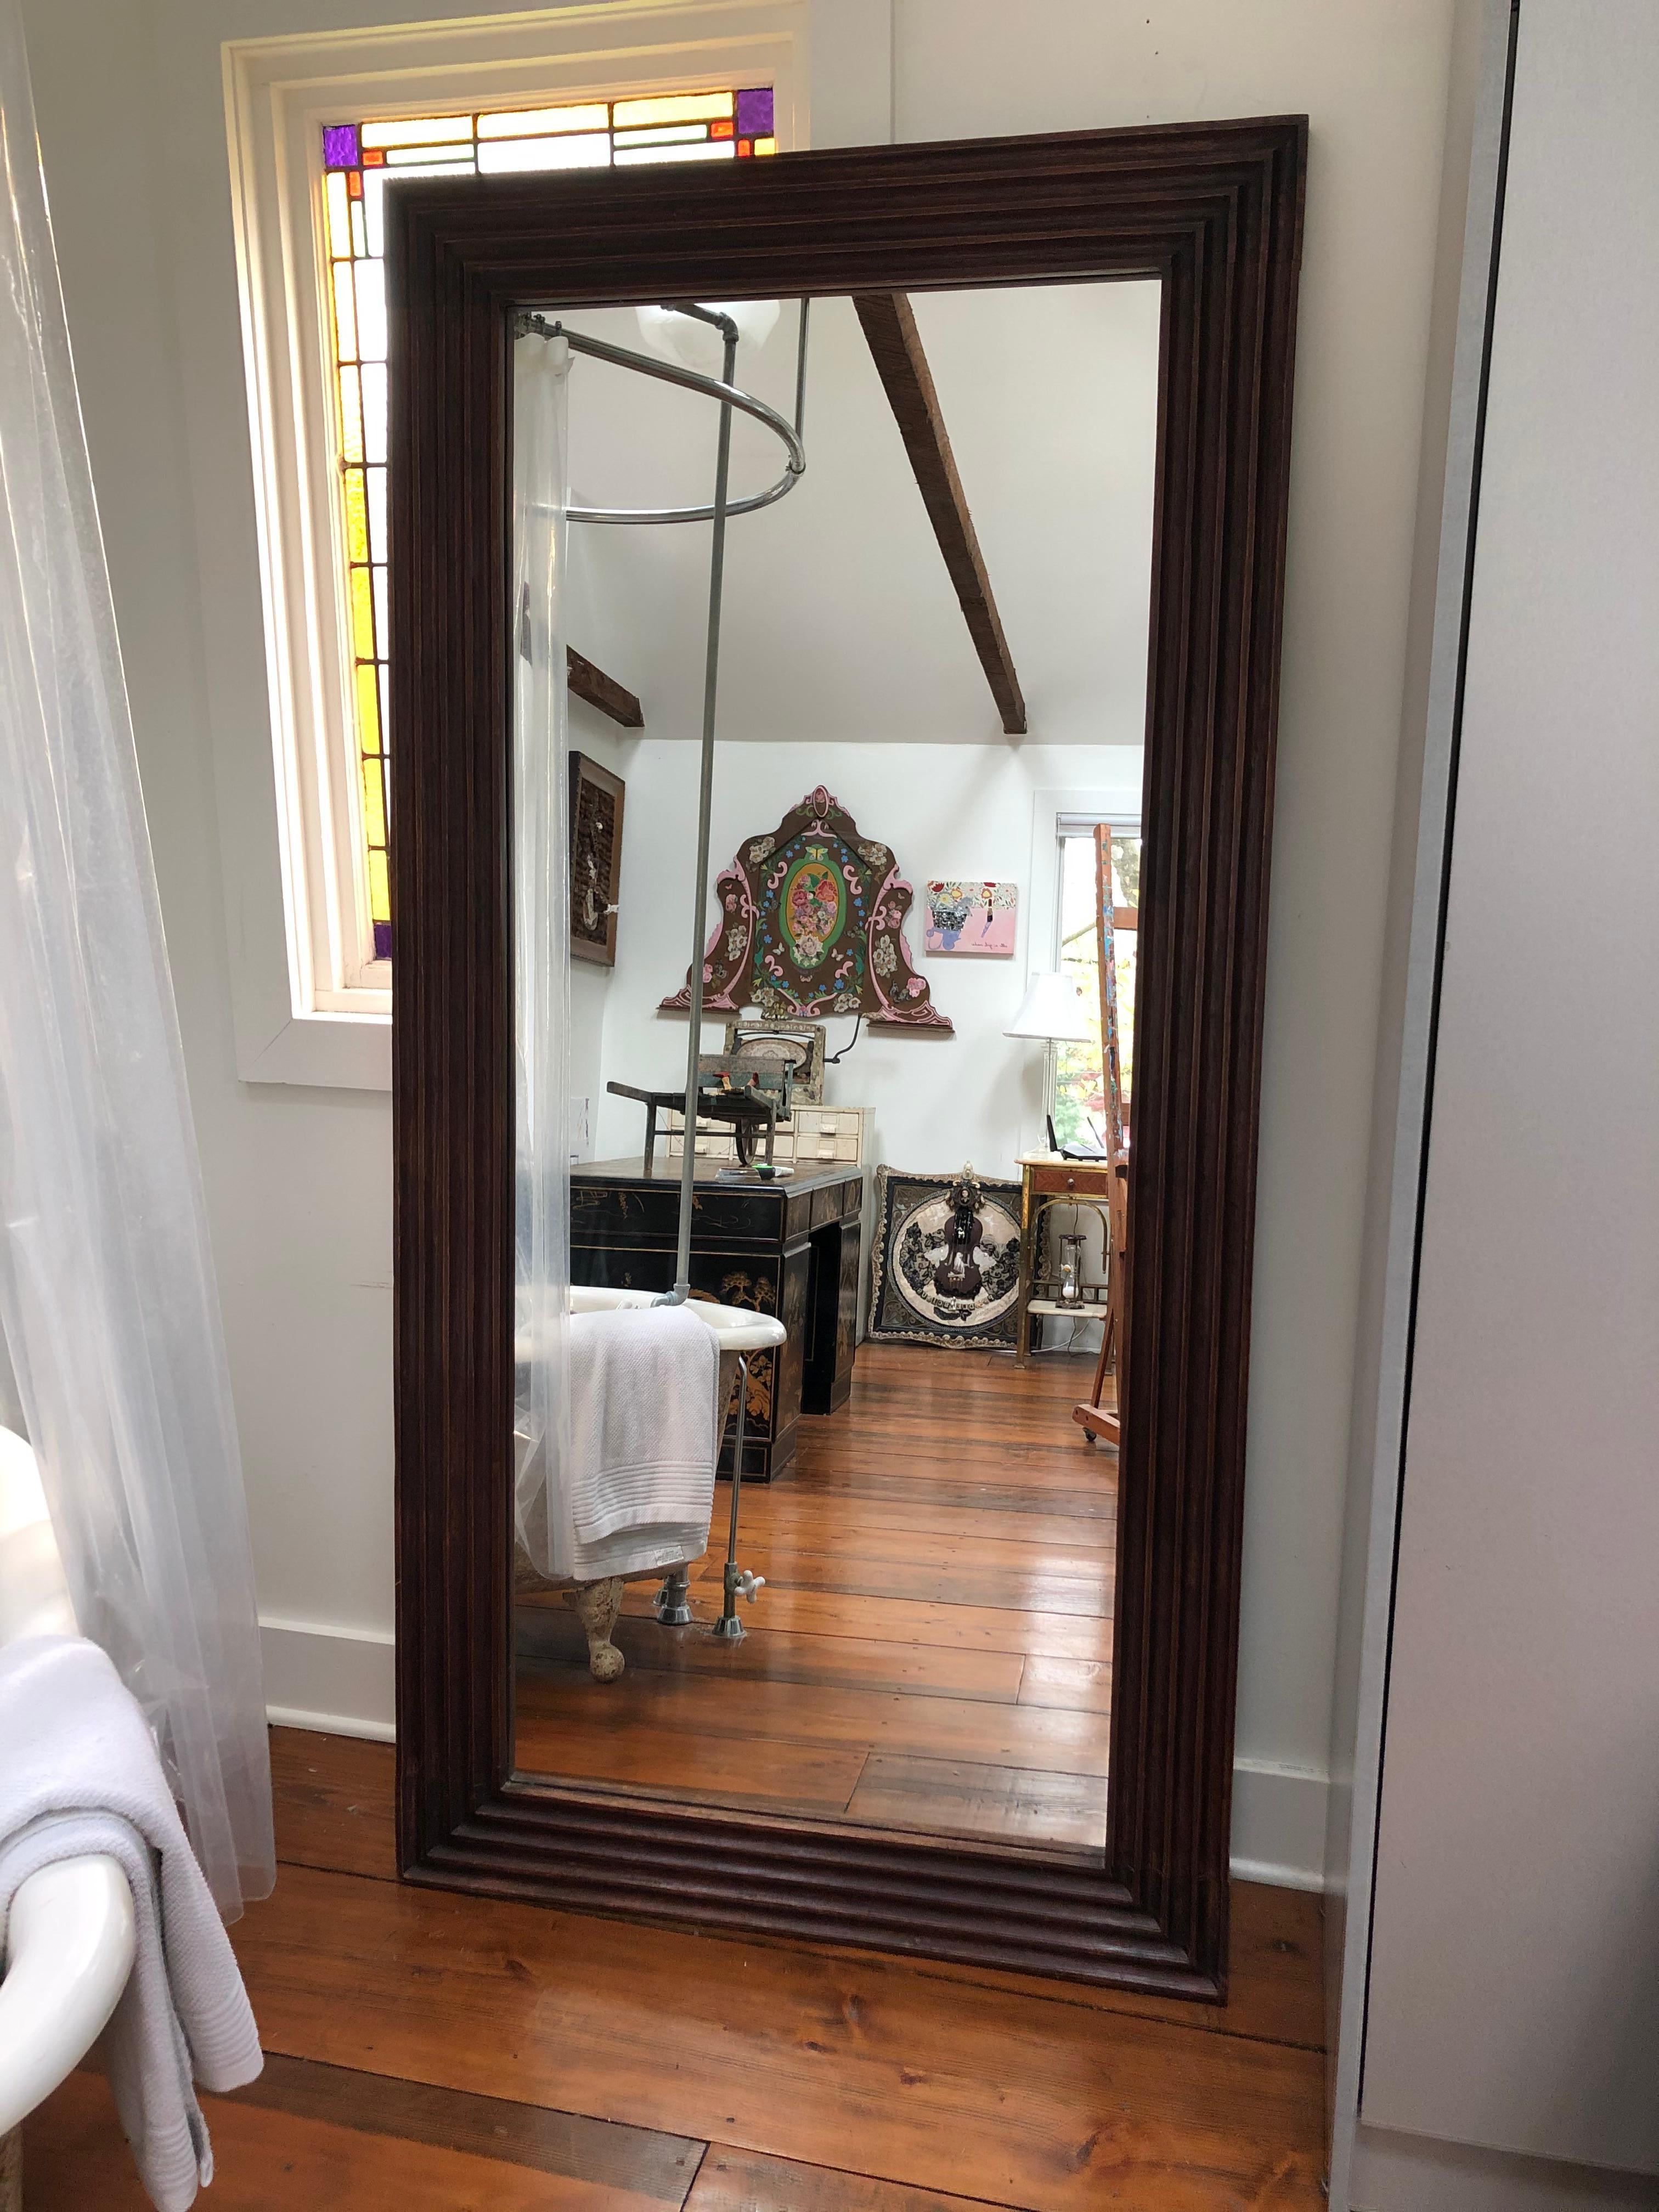 Supersized very handsome carved walnut rectangular mirror. Can be hung vertically or horizontally, or is great standing against a wall or corner for a full length view.